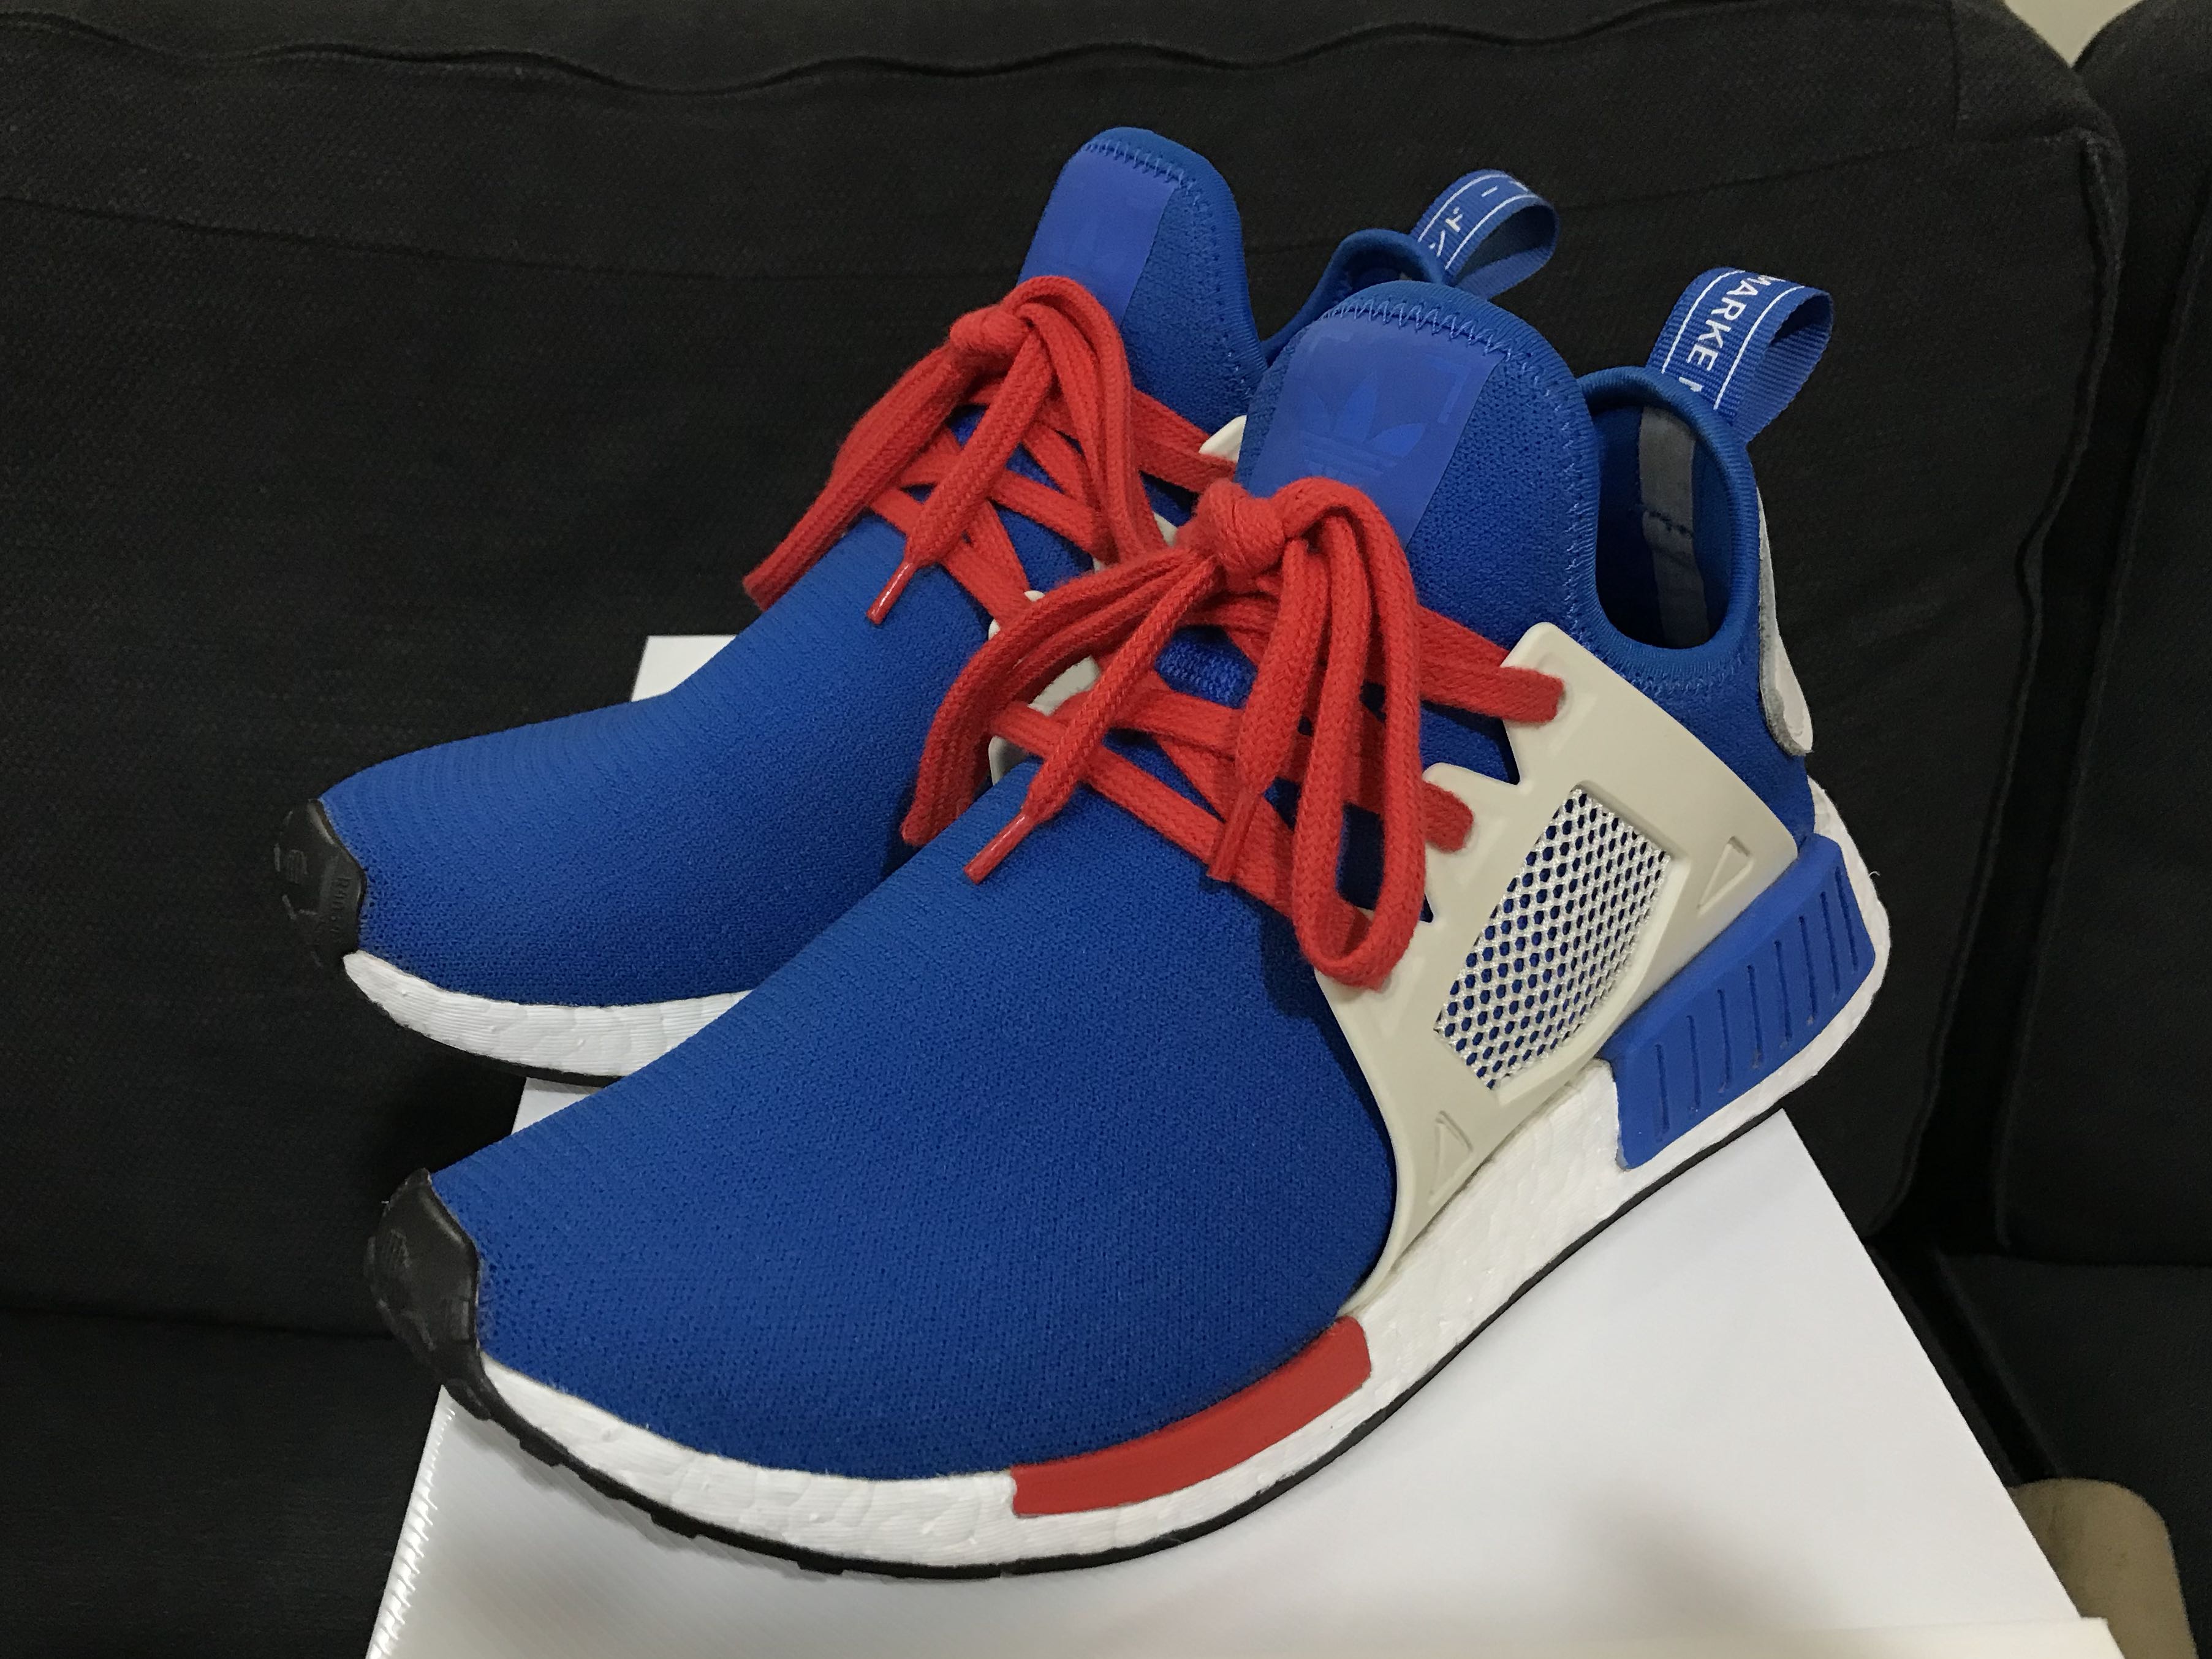 Adidas NMD XR1 And Zappos.